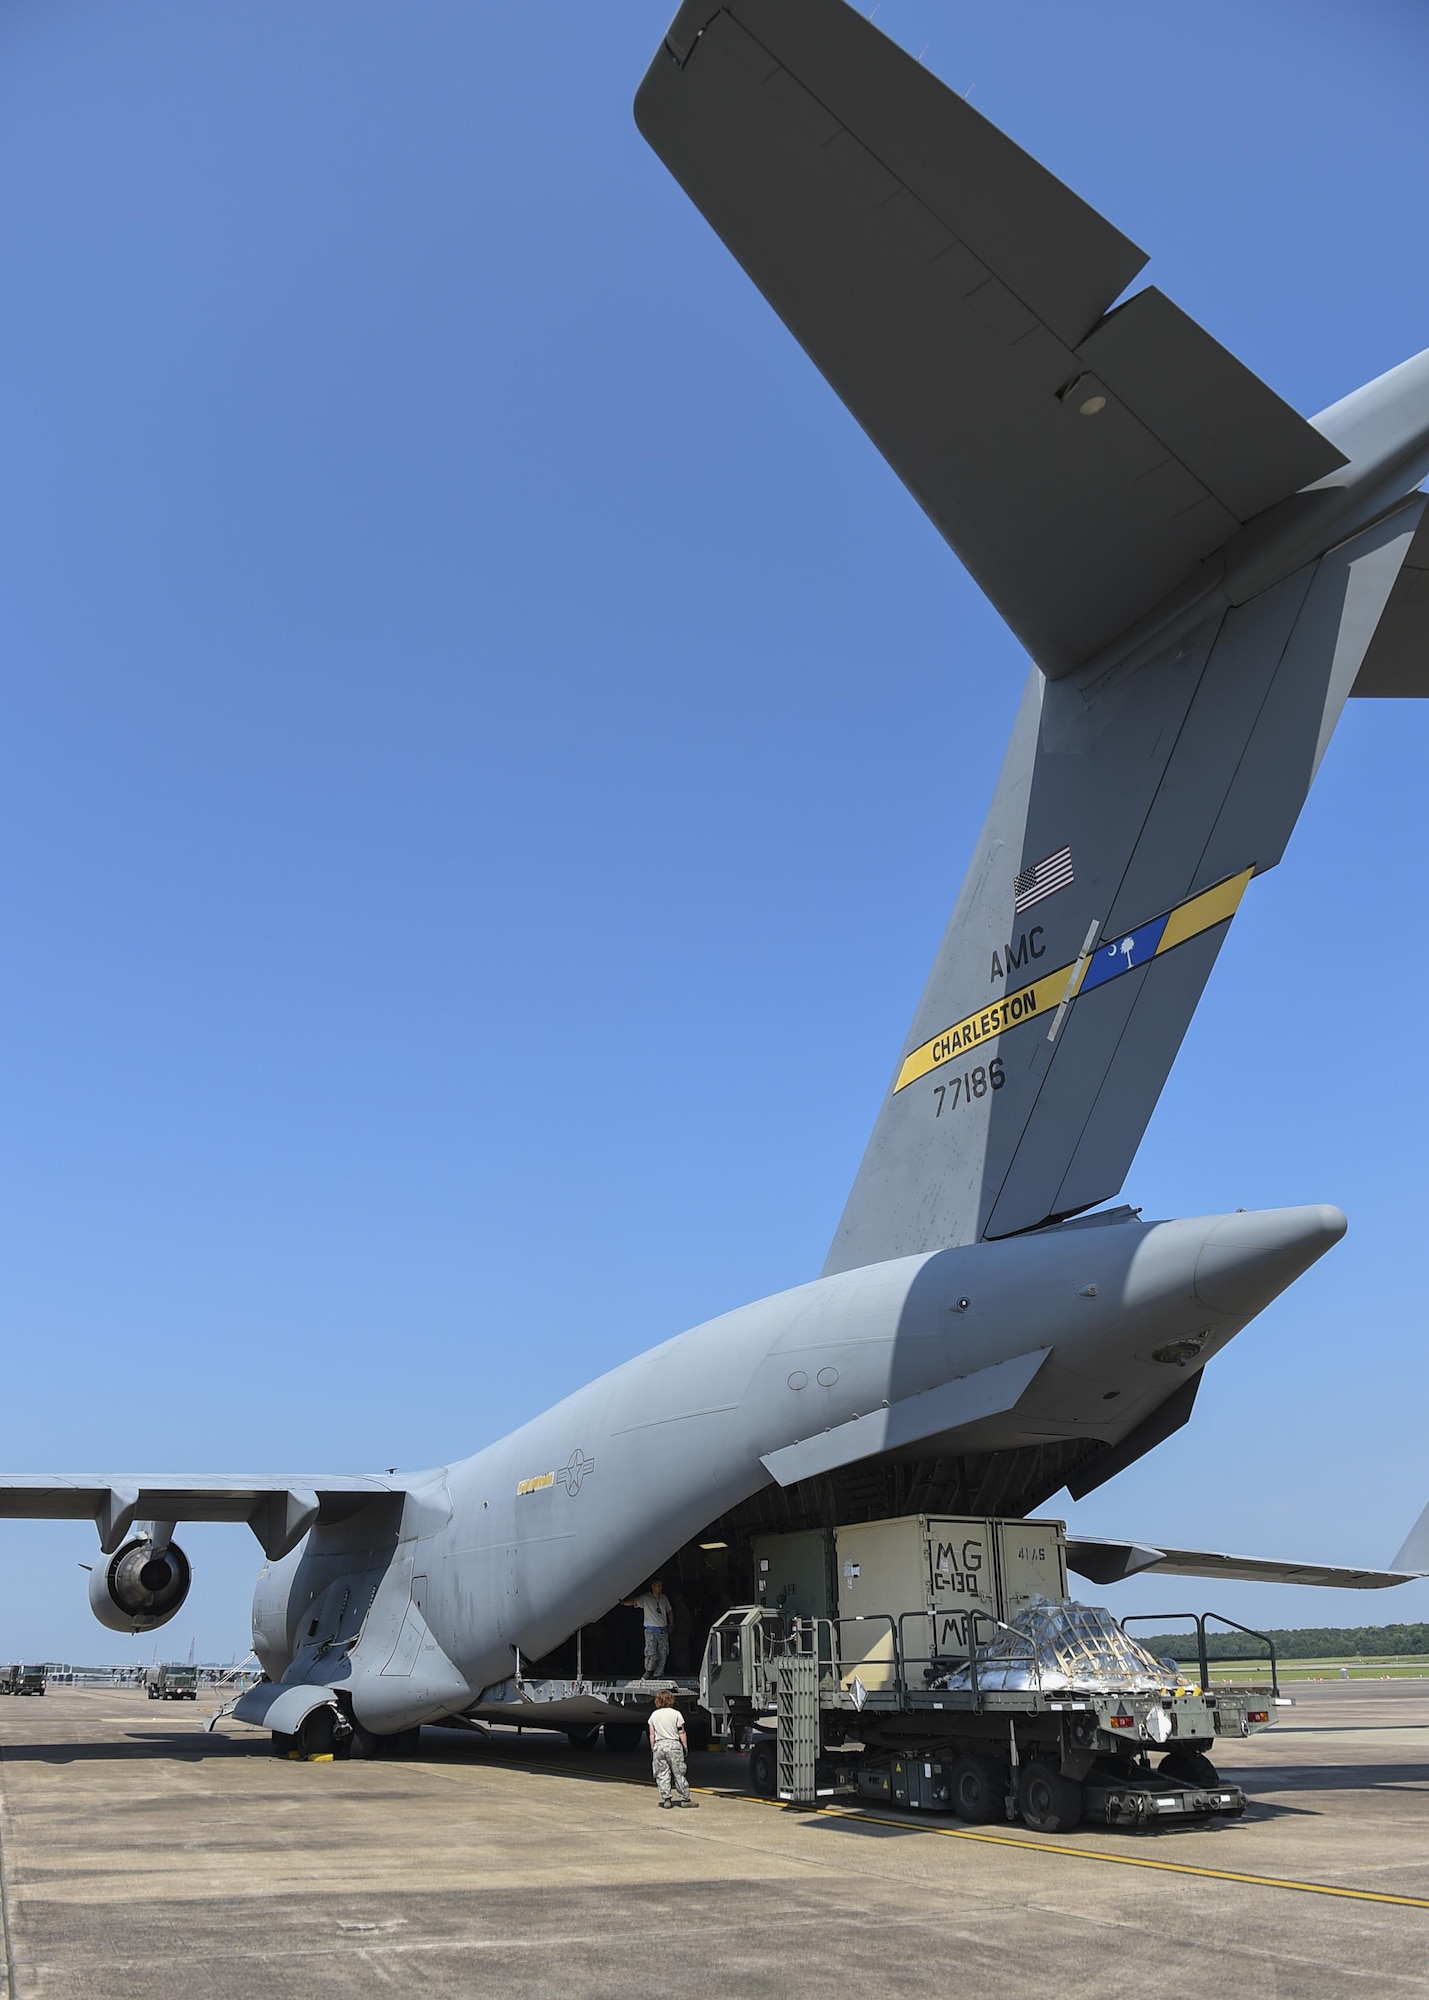 Aerial porters from the 19th Logistics Readiness Squadron load cargo onto a C-17 Globemaster from Joint Base Charleston, S.C. July 23, 2017, at Little Rock Air Force Base, Ark. Little Rock Airmen plan to join more than 3,000 Air Force and joint service members, alongside 25 international partners, to train together during Mobility Guardian 2017. (U.S. Air Force photo by Staff Sgt. Harry Brexel)